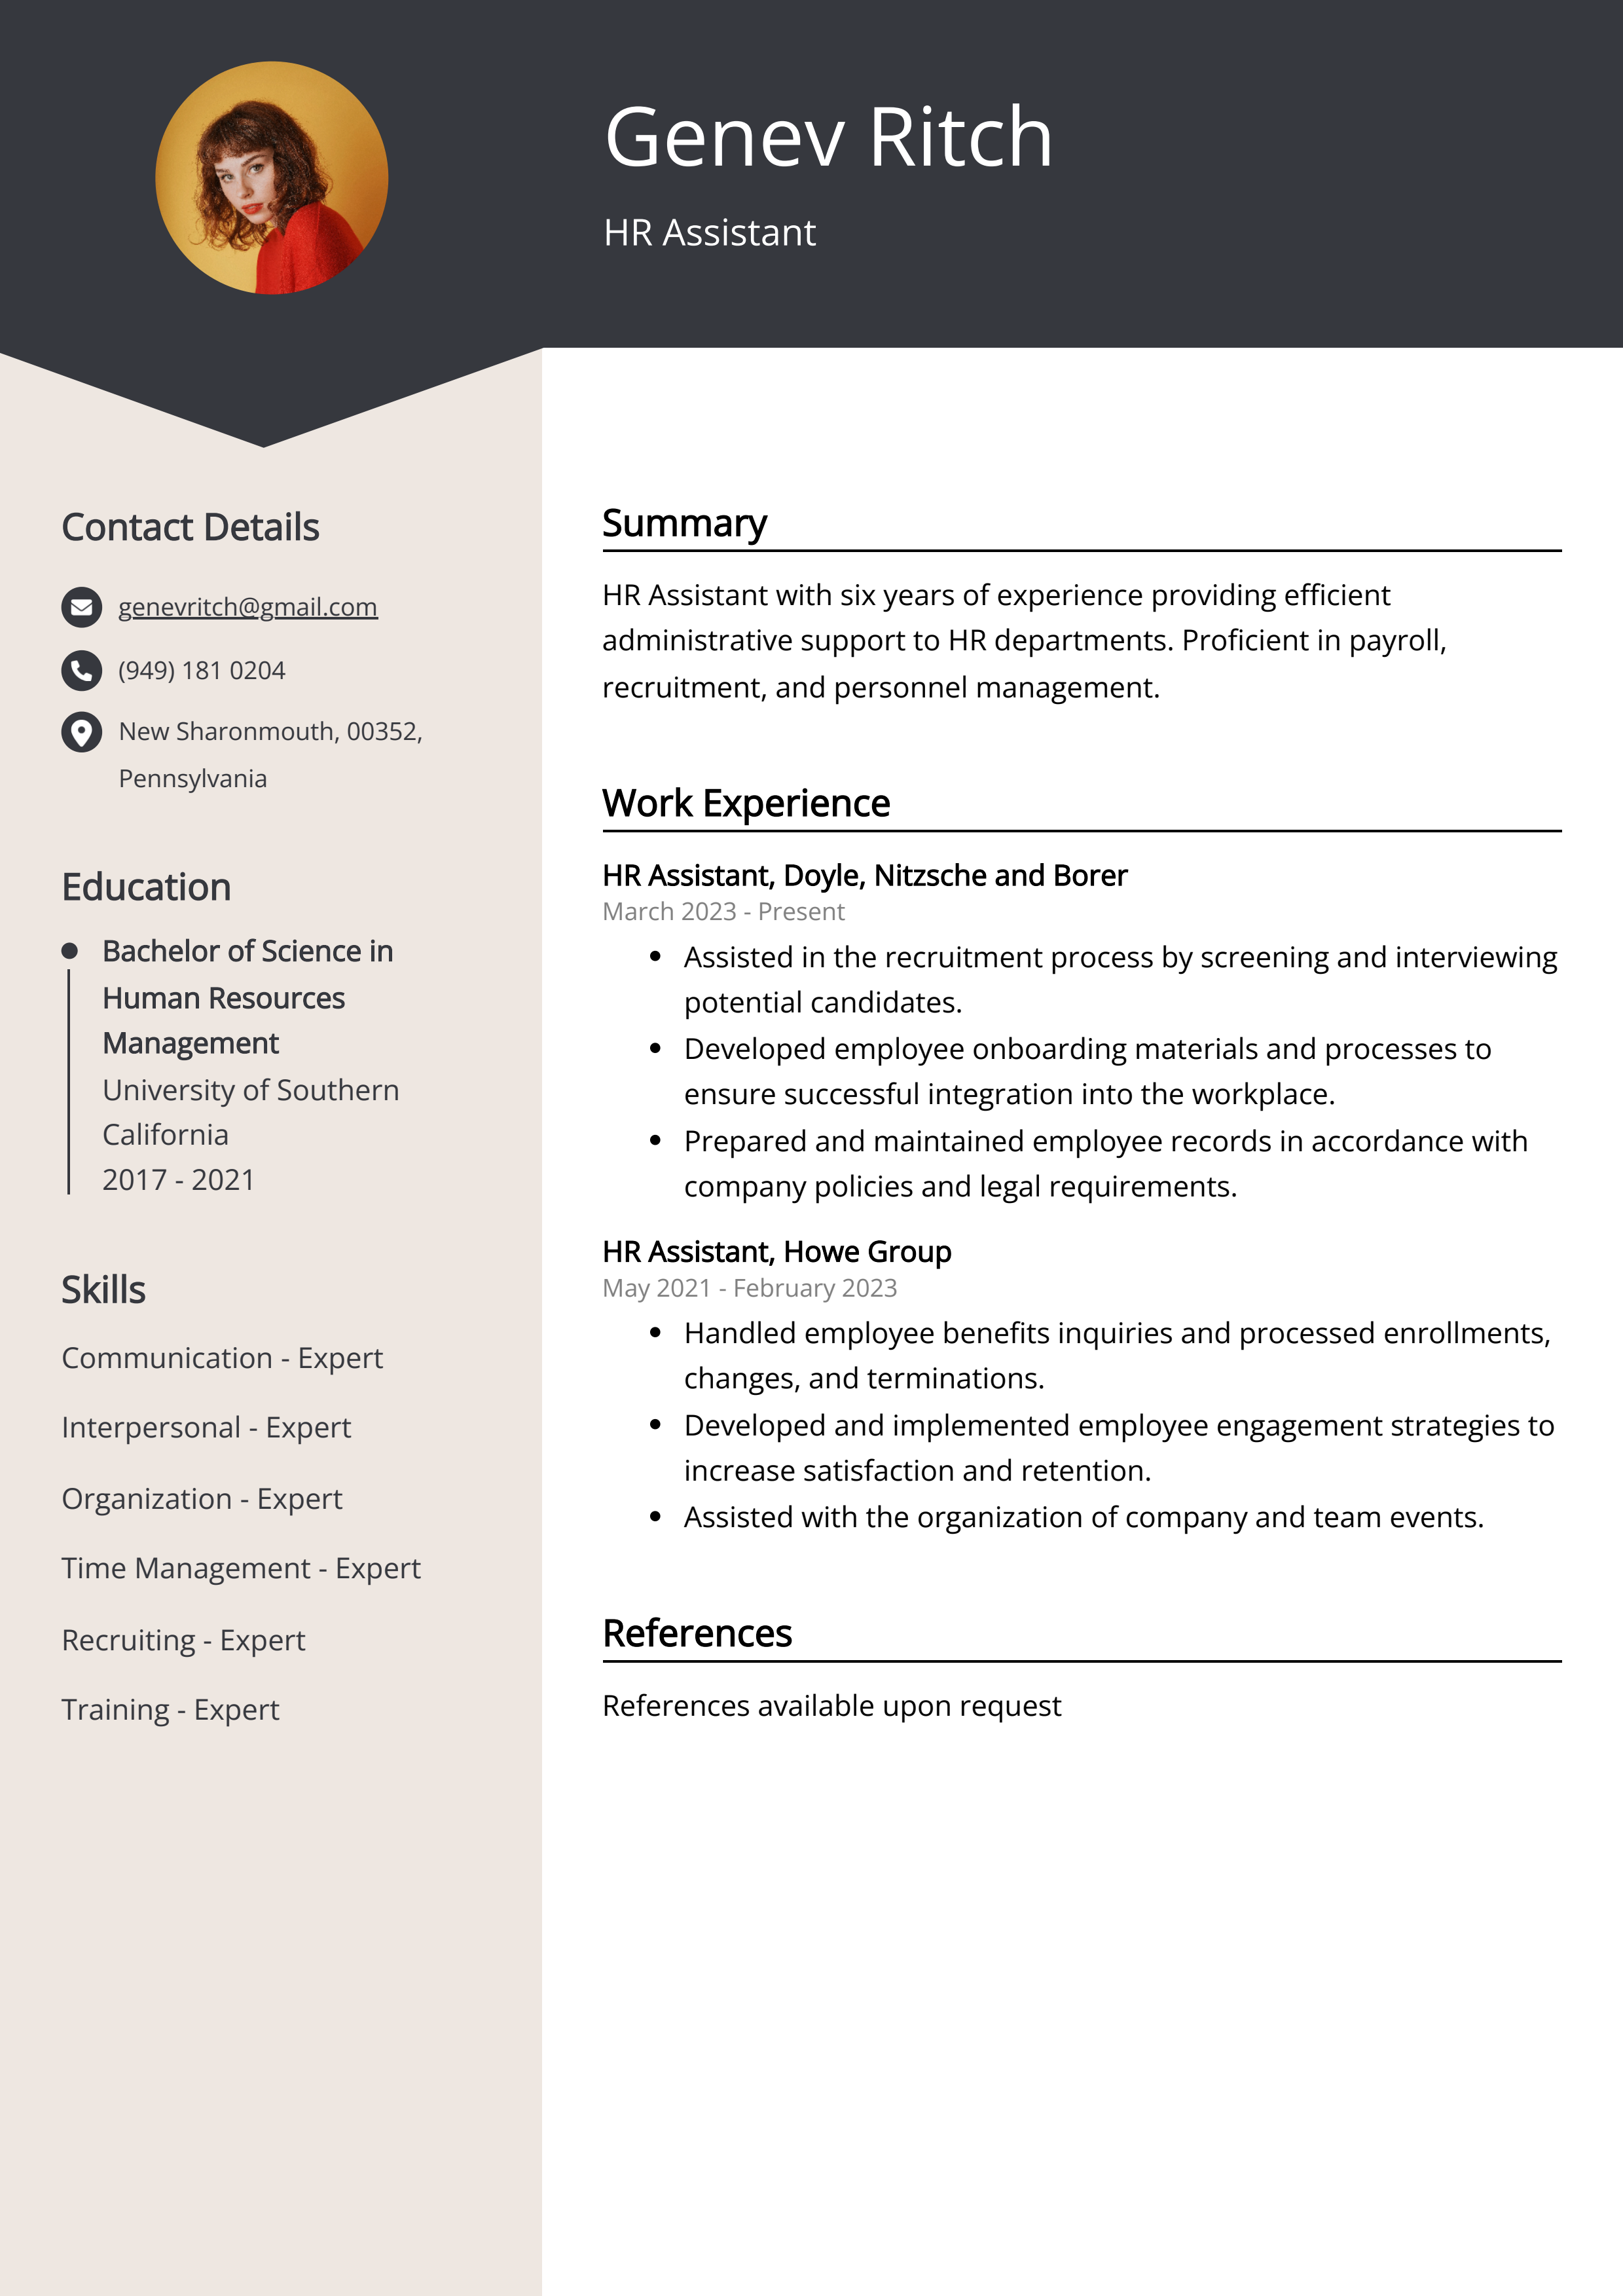 HR Assistant CV Example